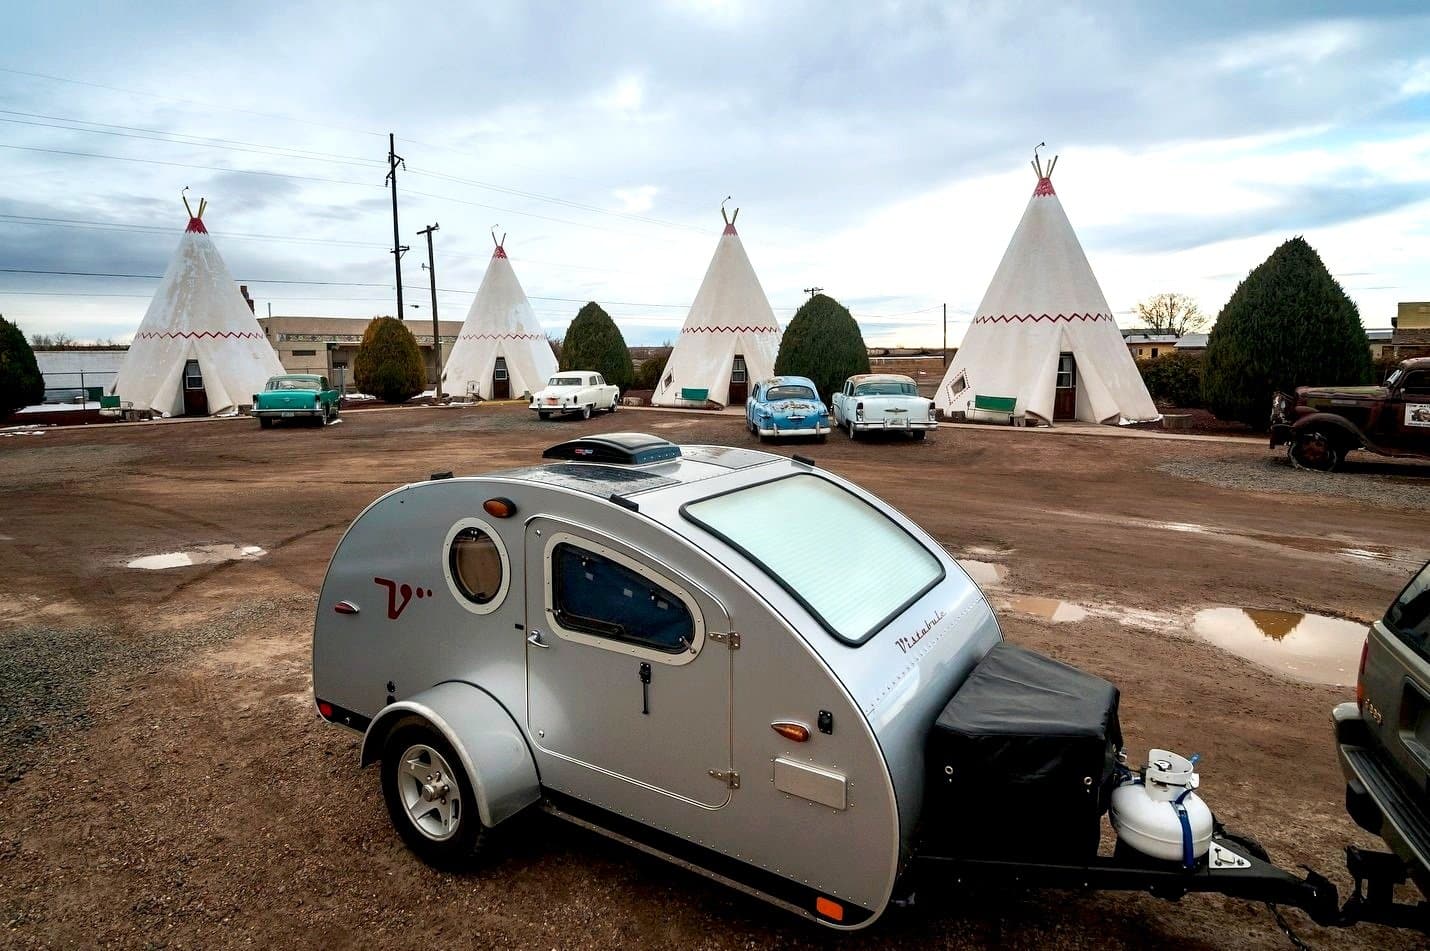 Teardrop Trailer Camping Vs. Tent Camping: Which Is Right For You?